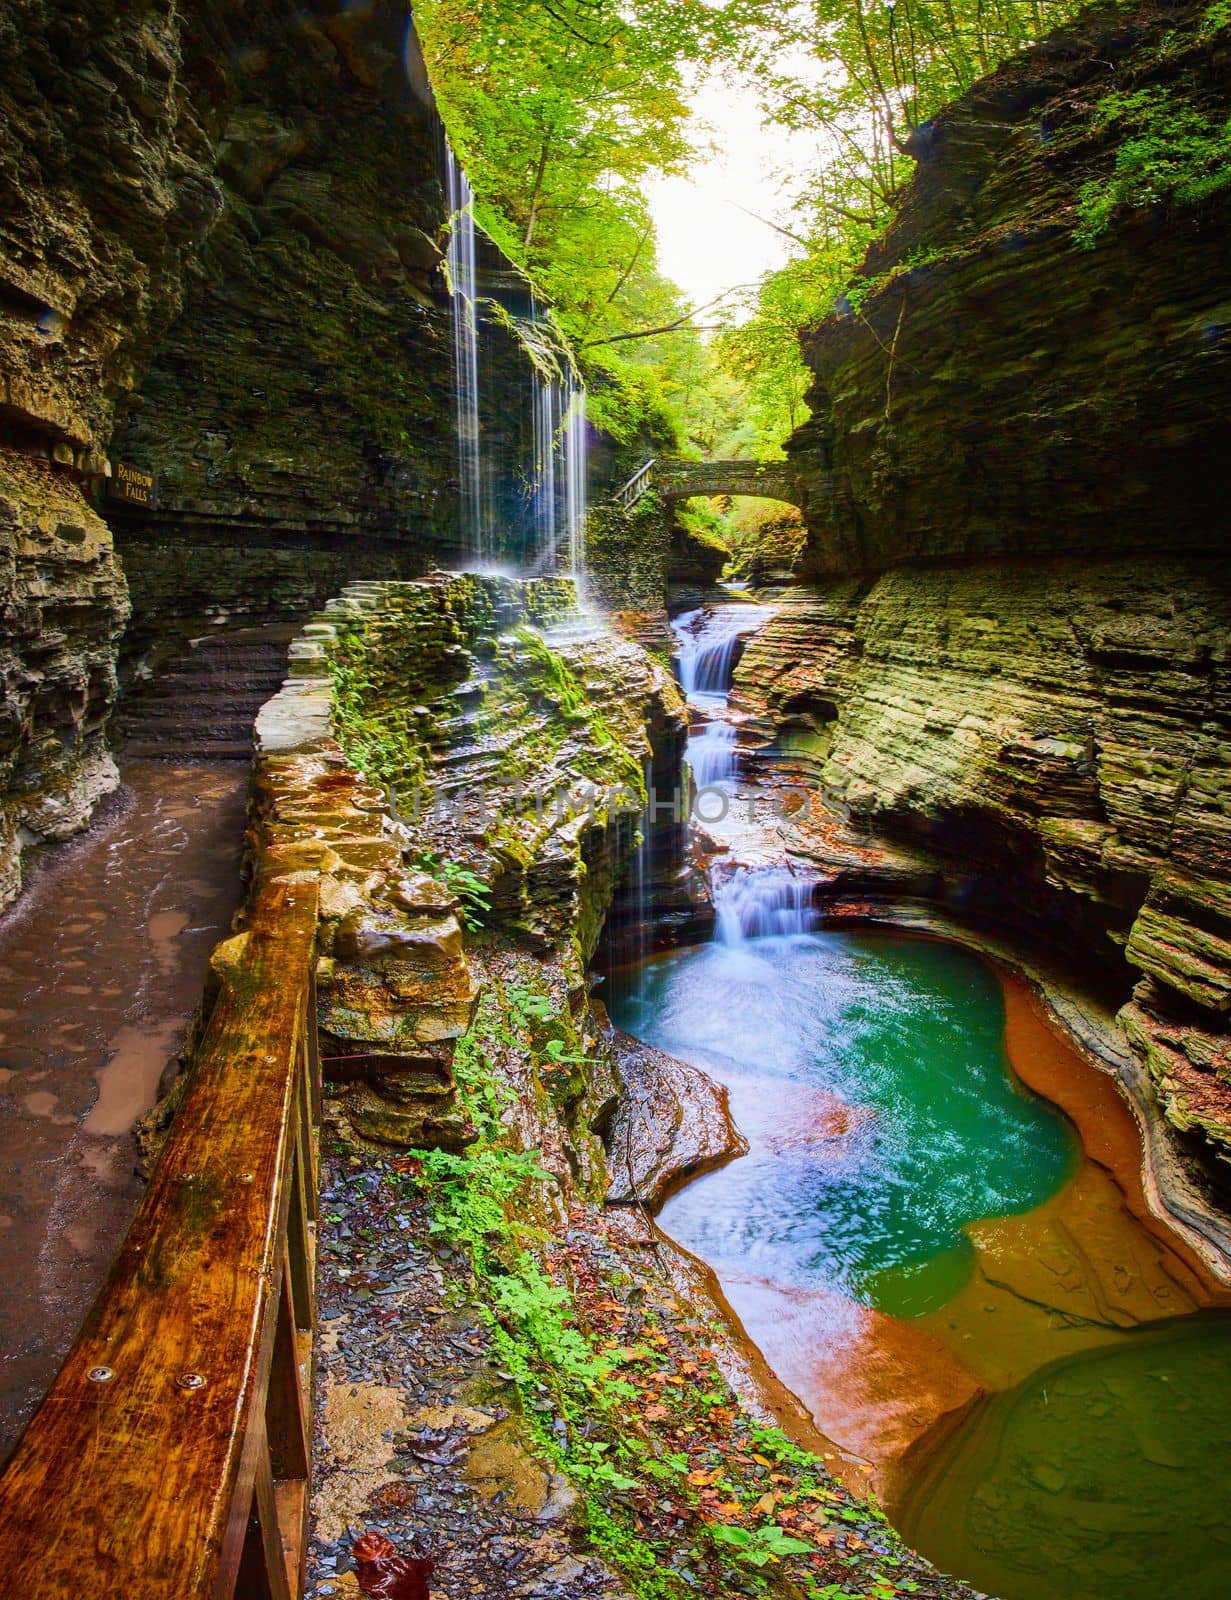 Image of Watkins Glen in Upstate New York of Rainbow Falls during fall